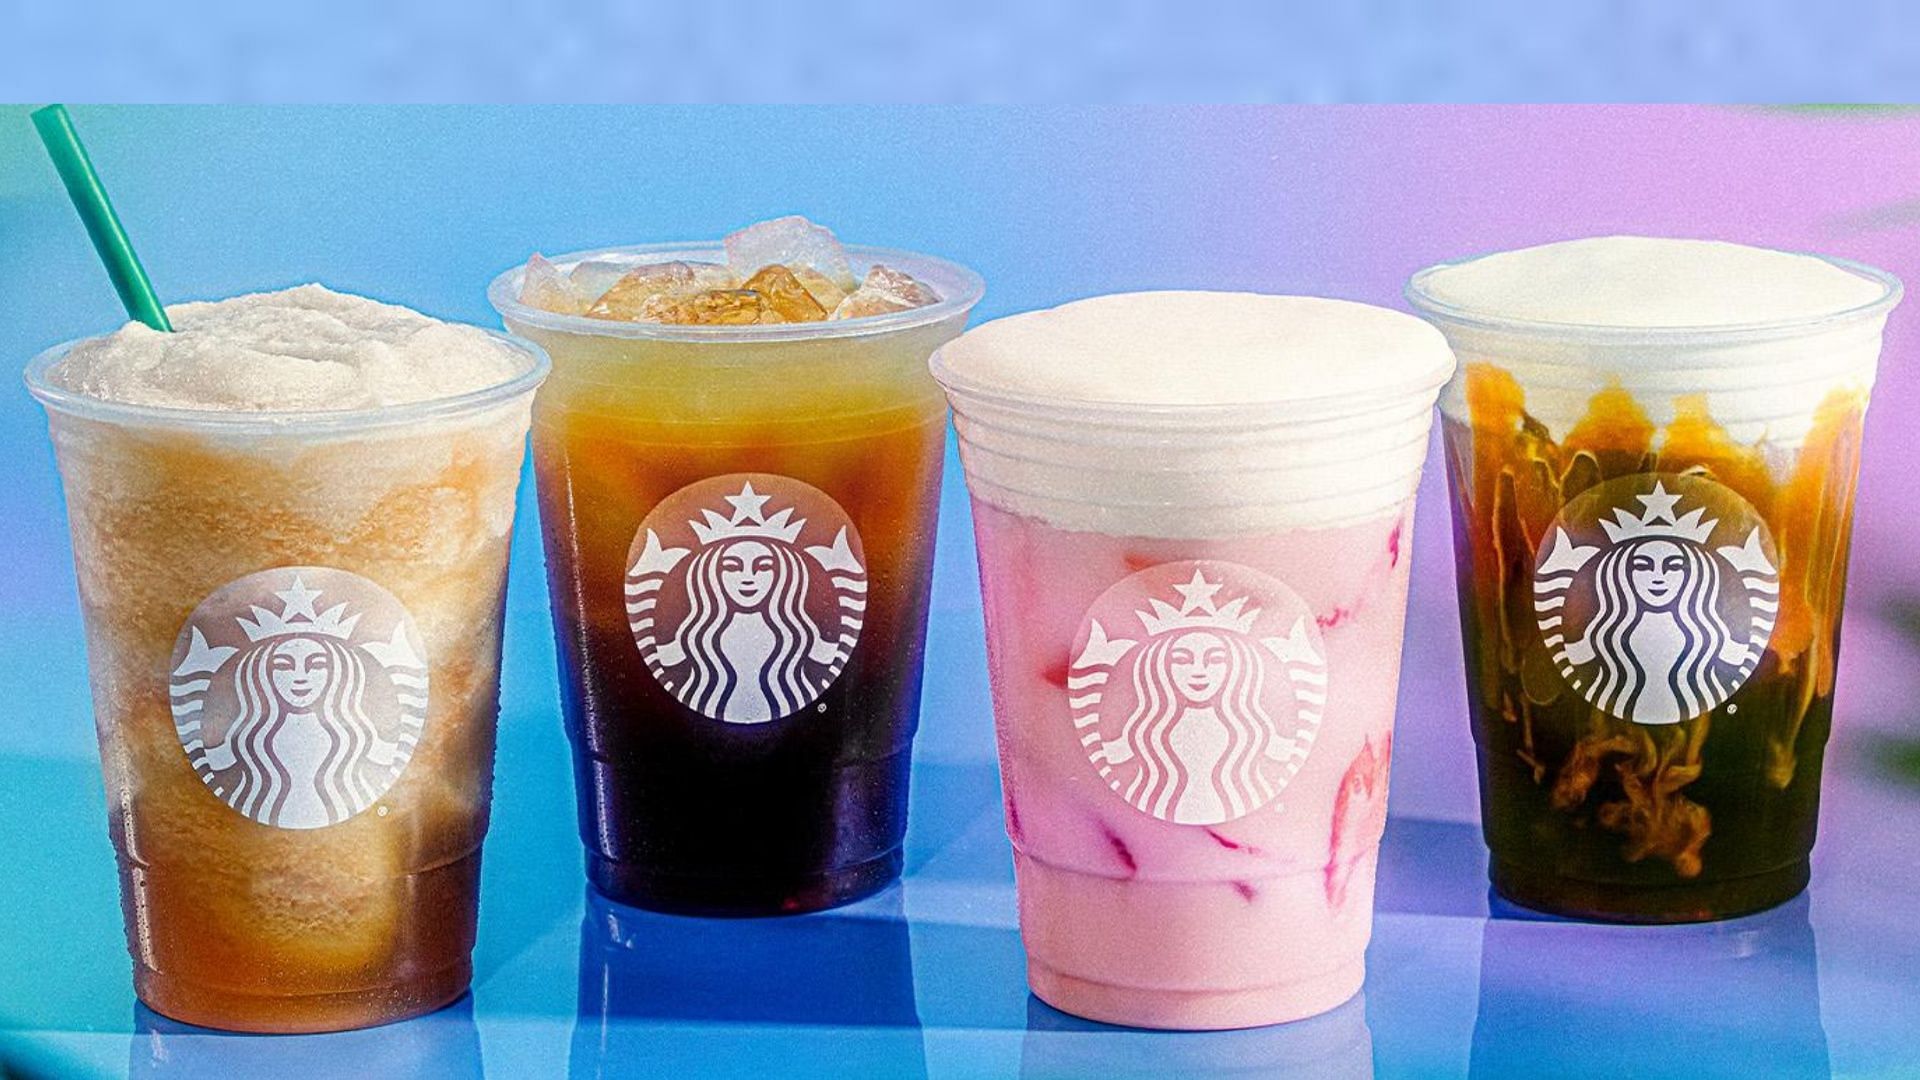 The new Summer Remix drink customizations can be availed at stores all year long (Image via Starbucks)